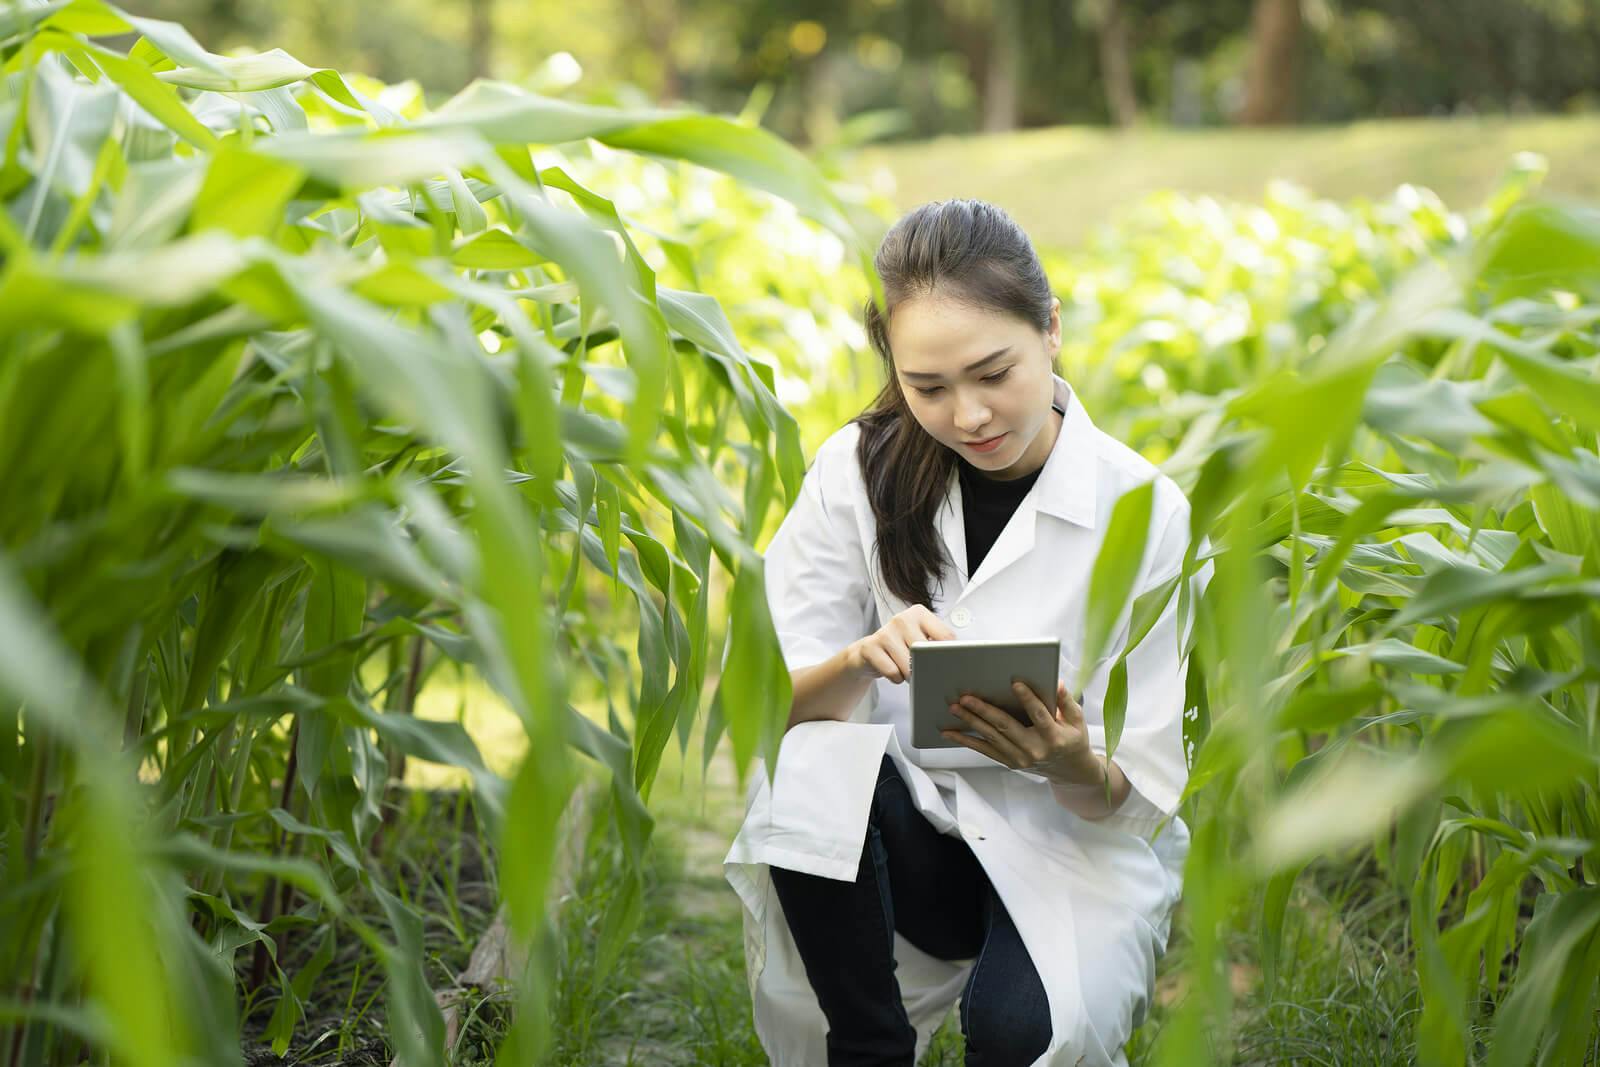 A female scientist in a white coat takes notes while crouched down beside a row of plants in a field